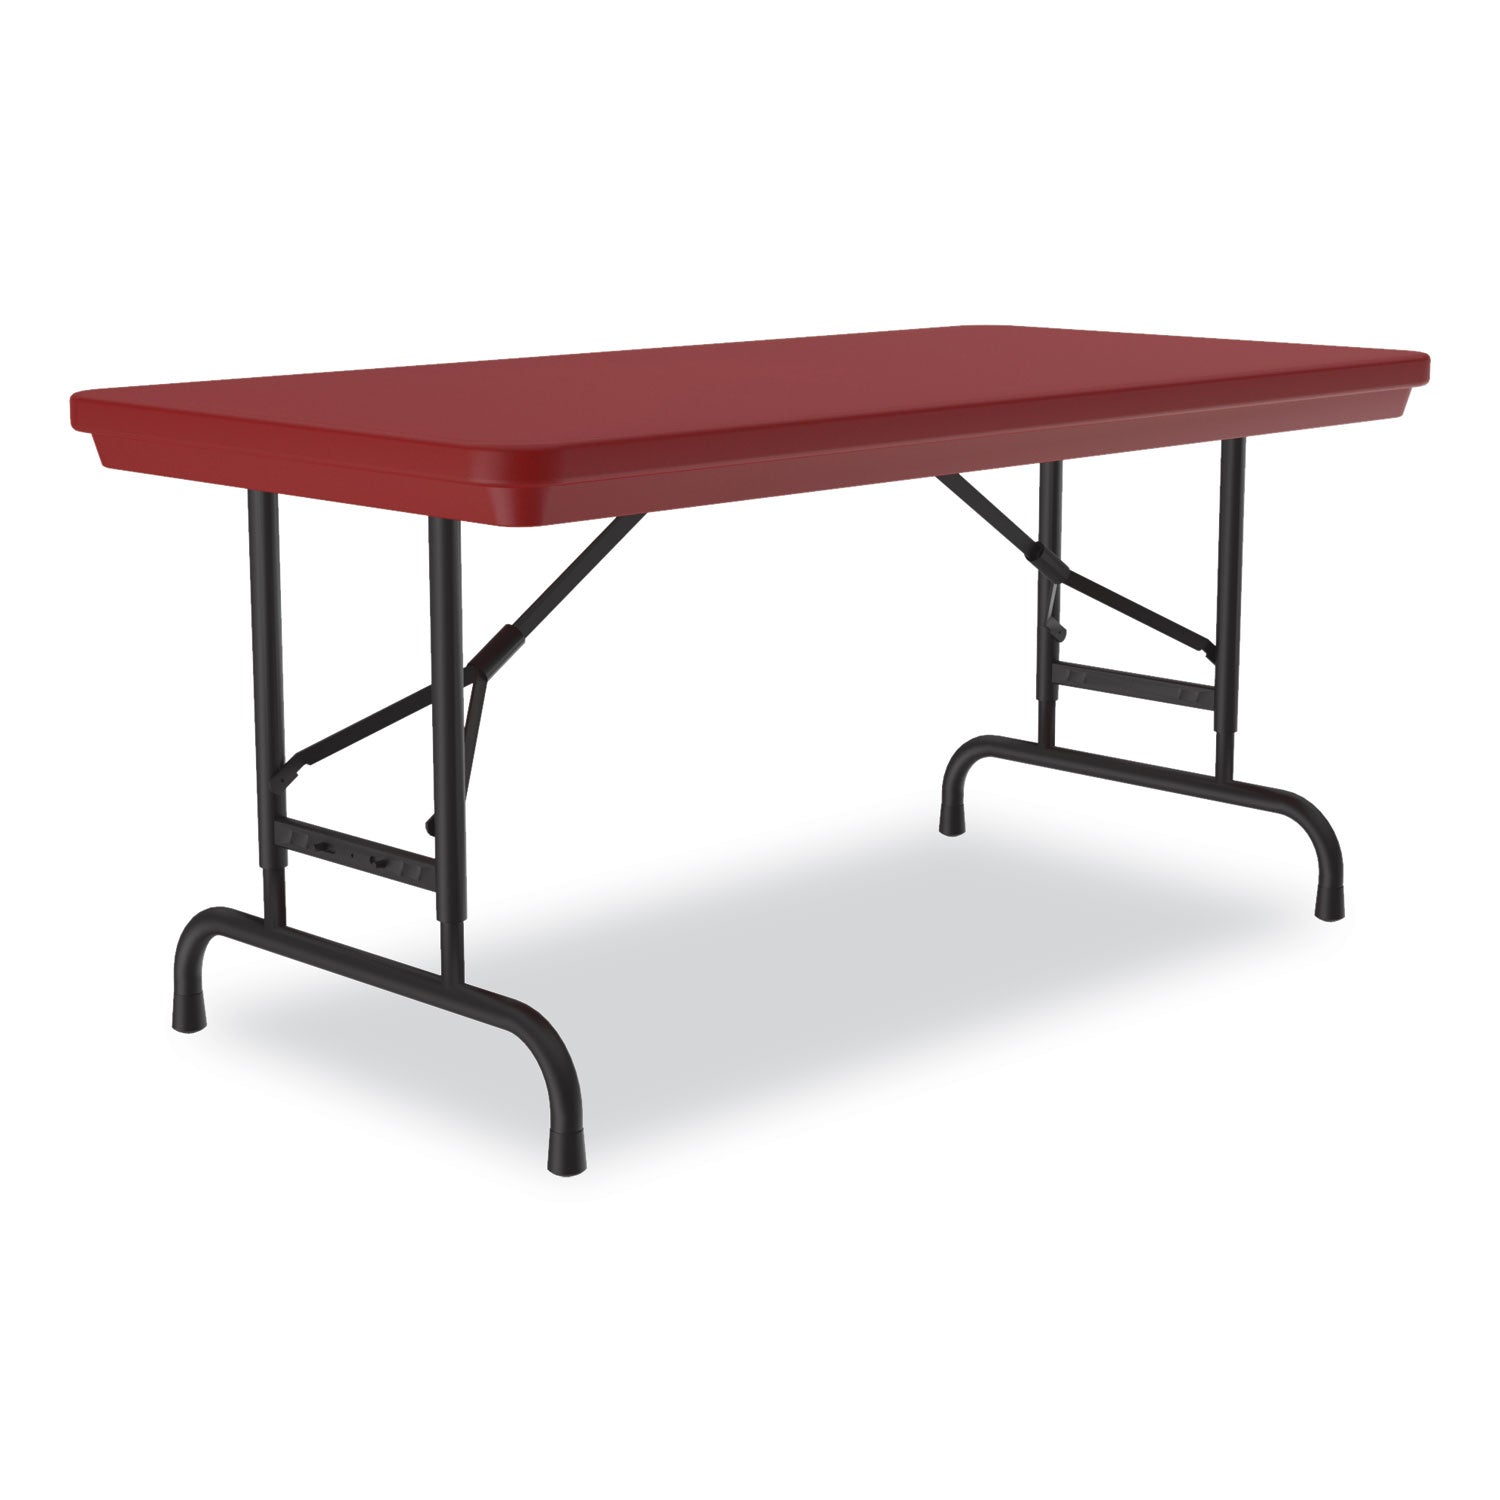 adjustable-folding-table-rectangular-48-x-24-x-22-to-32-red-top-black-legs-4-pallet-ships-in-4-6-business-days_crlra2448254p - 4